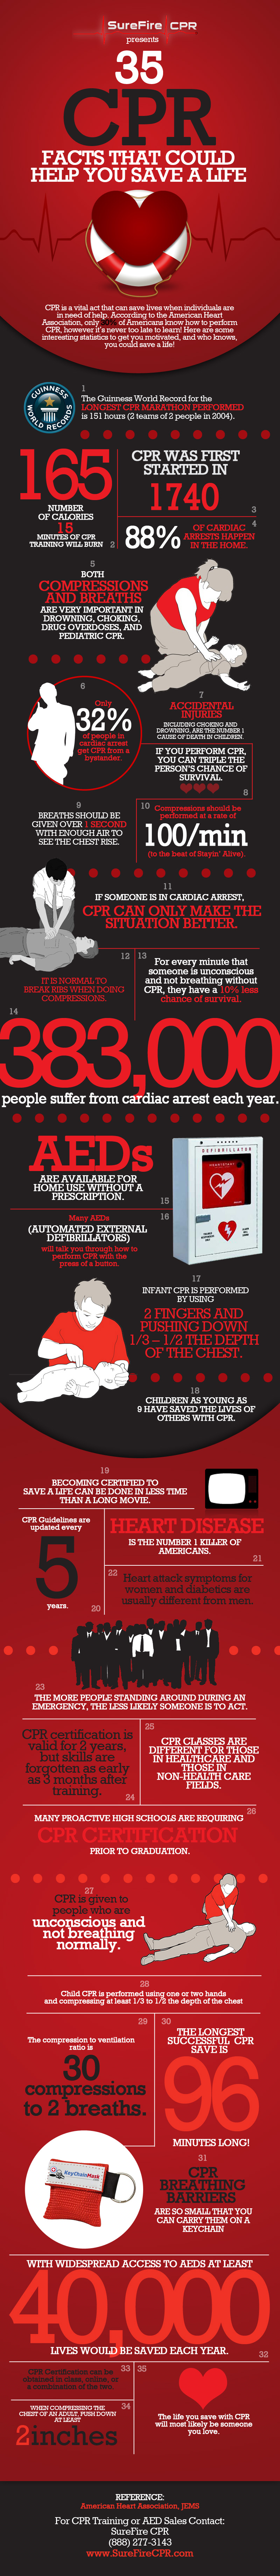 CPR Statistics and Facts